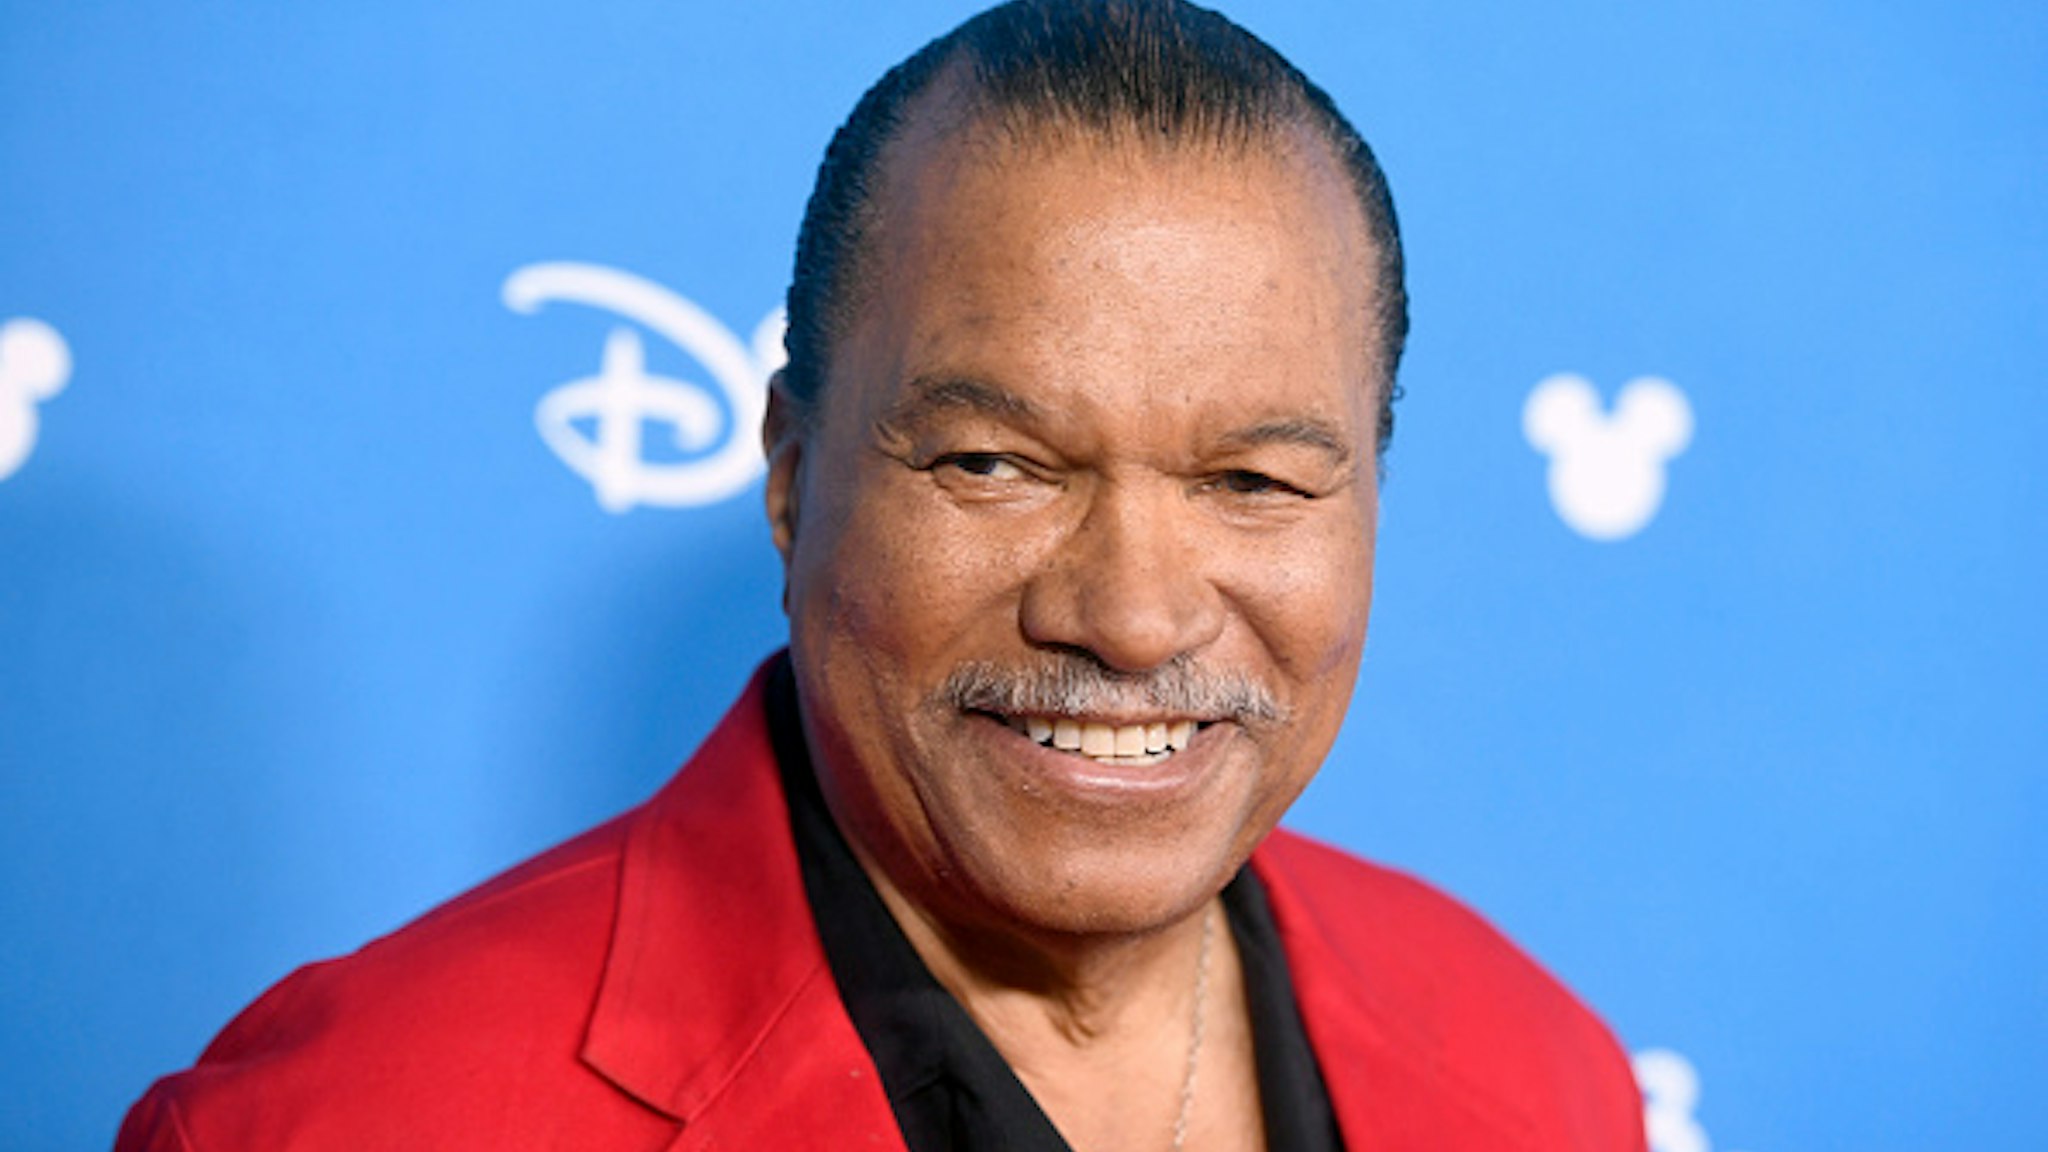 ANAHEIM, CALIFORNIA - AUGUST 24: Billy Dee Williams attends Go Behind The Scenes with Walt Disney Studios during D23 Expo 2019 at Anaheim Convention Center on August 24, 2019 in Anaheim, California.